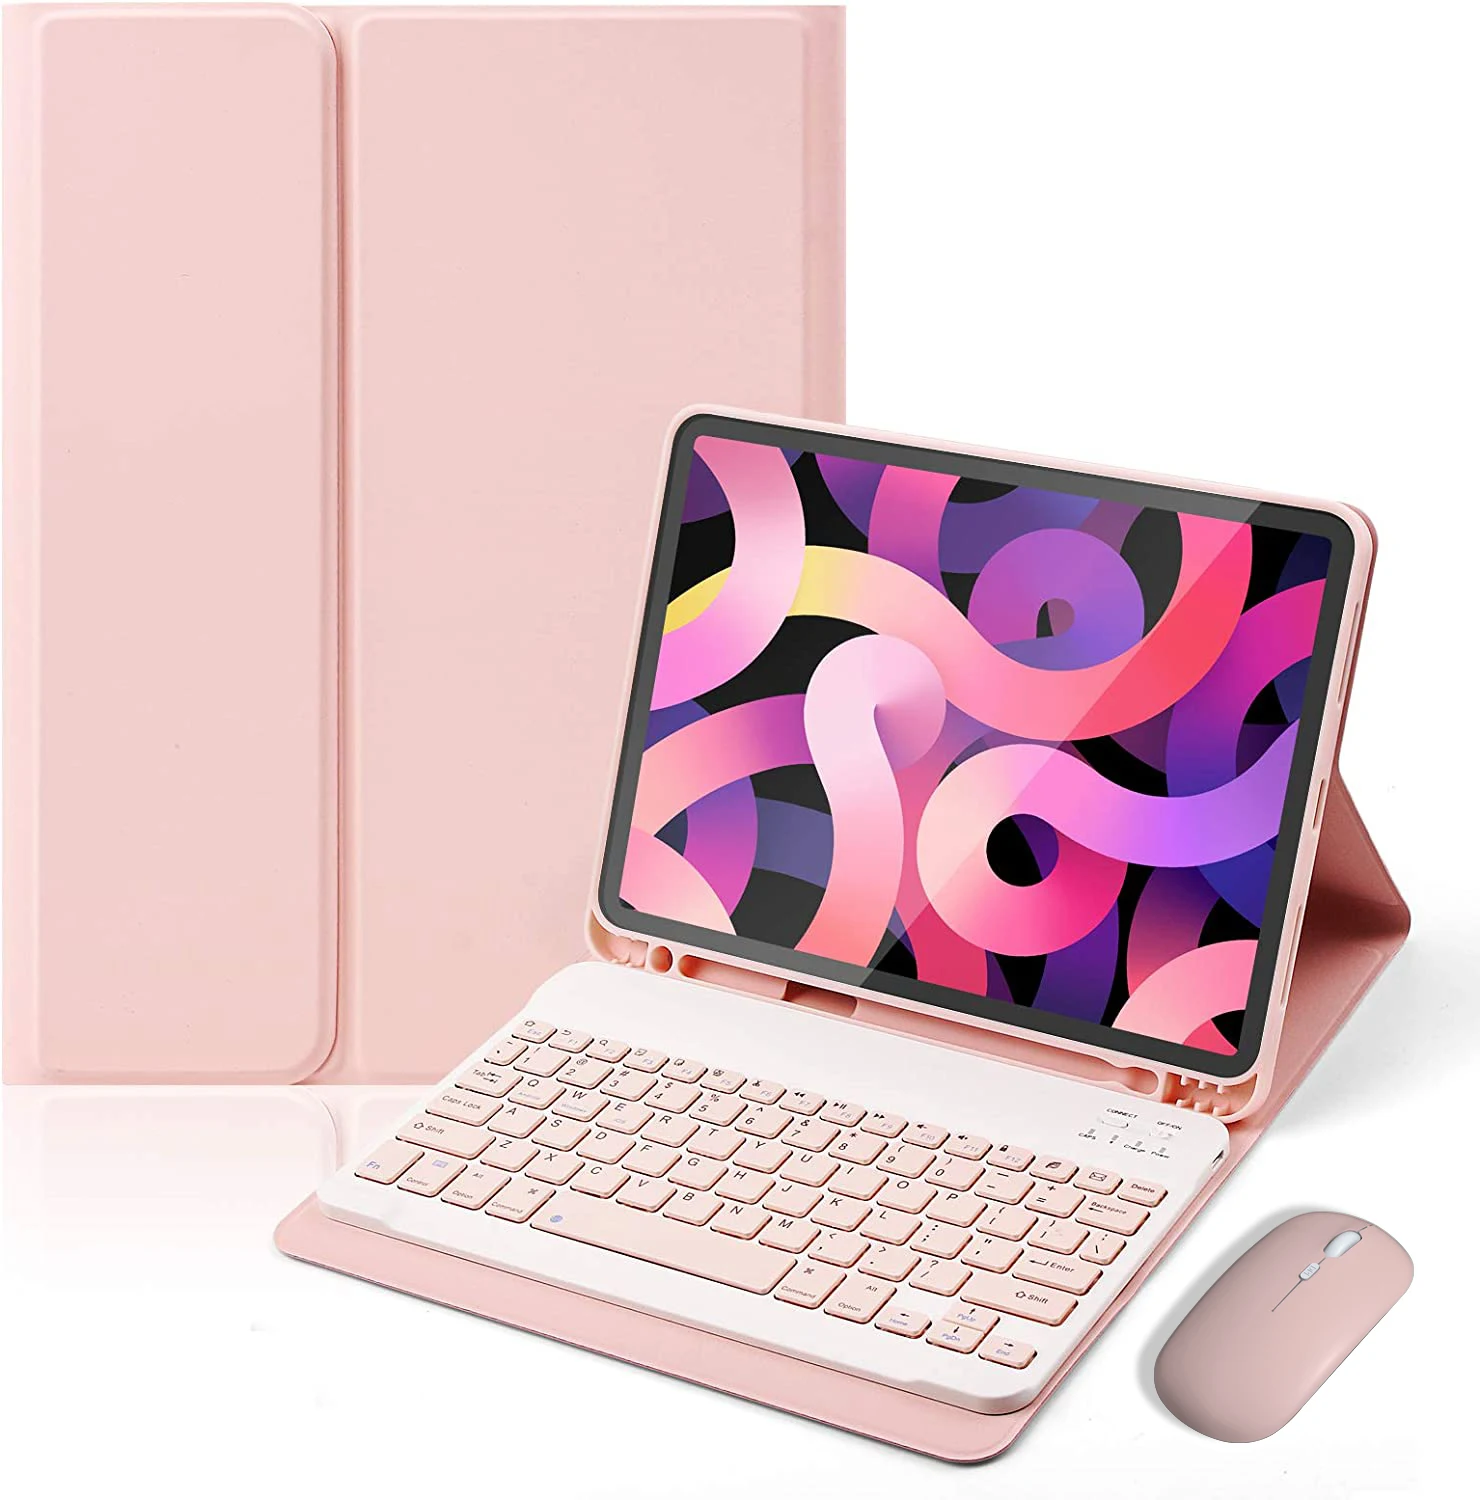 

iPad Keyboard Case Mouse 2.4GHz For Air 3 2 1 10.5 iPad 9th gen 8th 7th 10.2 6 5th 9.7 Air4 Air5 10th 10.9 Pro 11 inch Pro 12.9